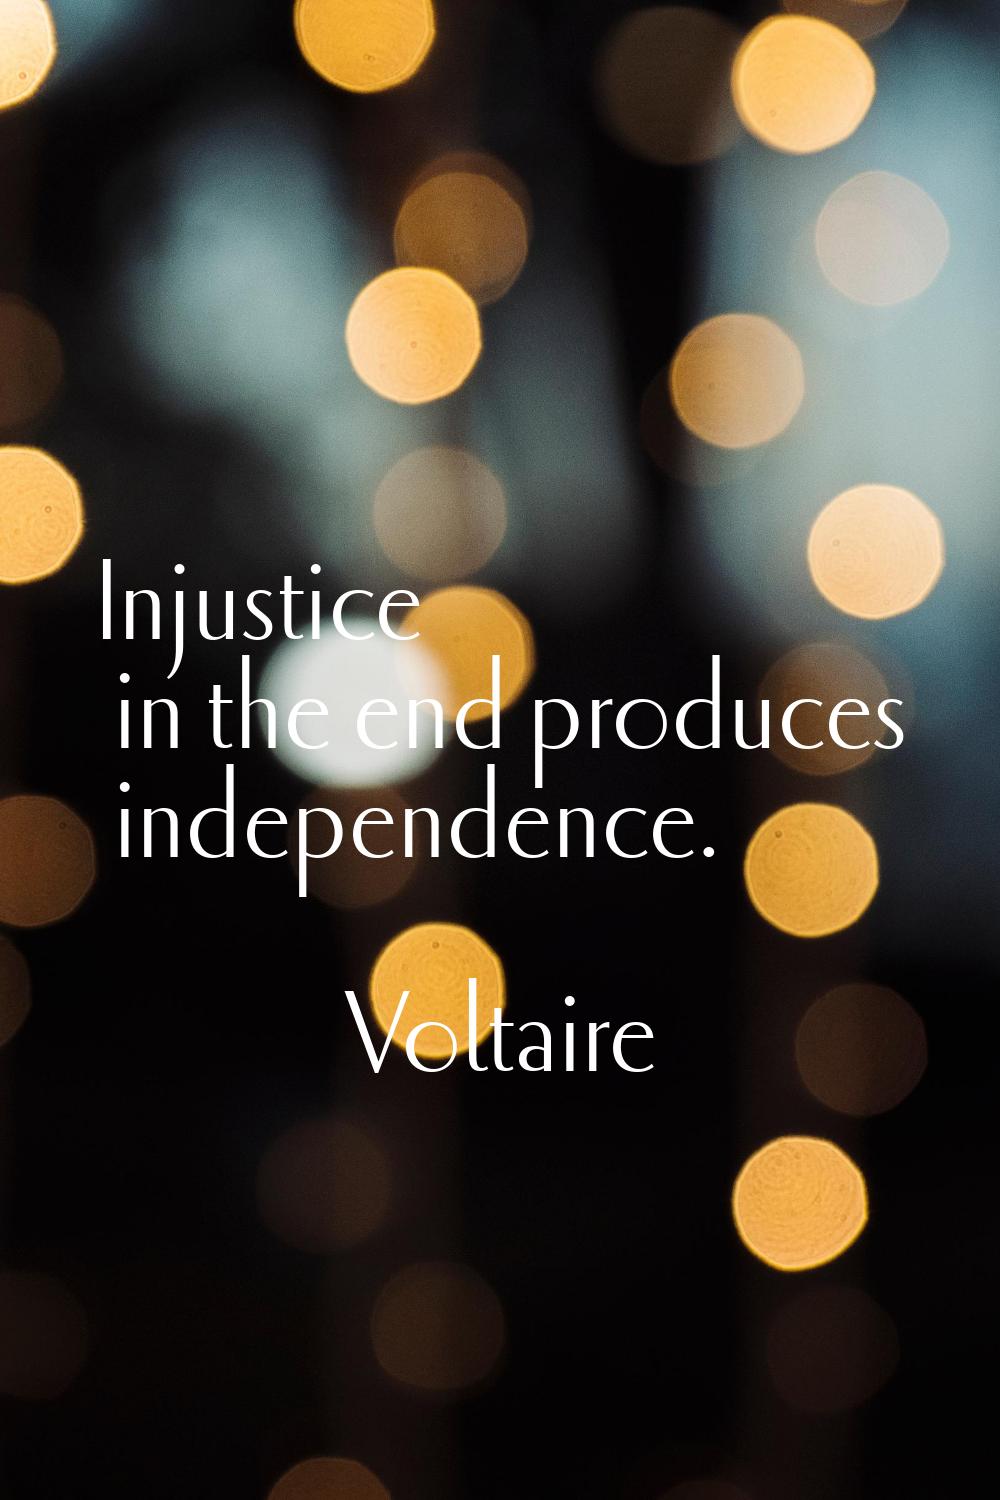 Injustice in the end produces independence.